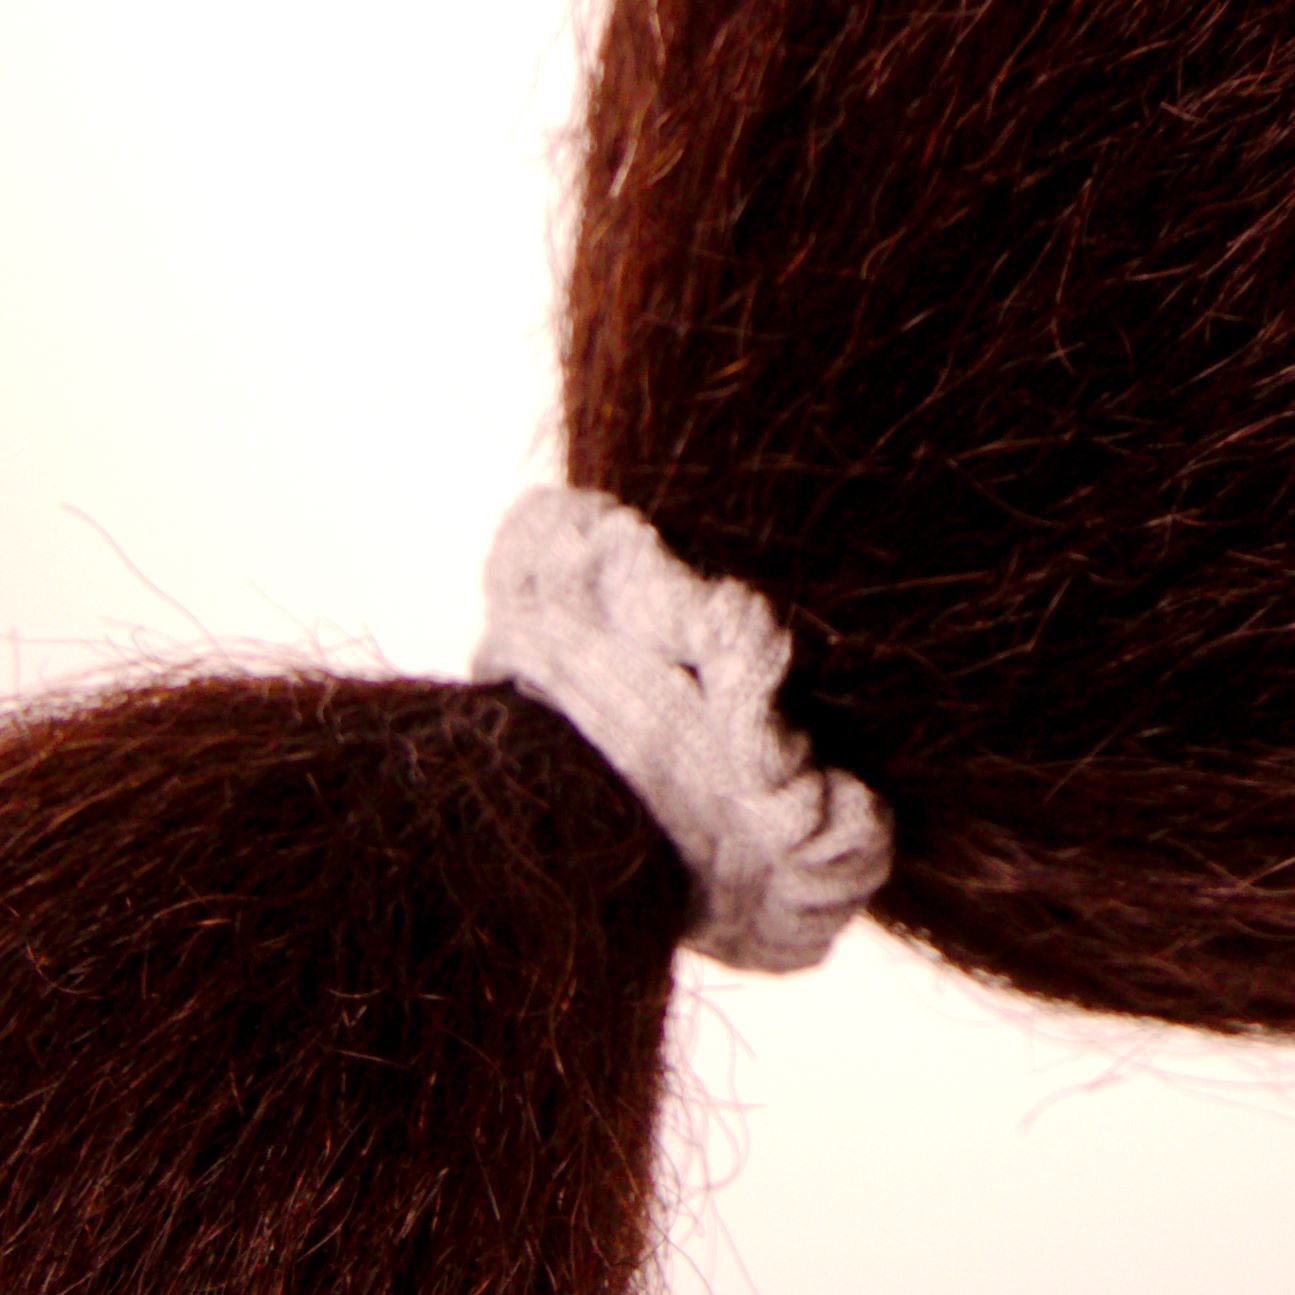 Amelia Beauty, Grey Ribbed Scrunchies, 2.25in Diameter, Gentle on Hair, Strong Hold, No Snag, No Dents or Creases. 10 Pack